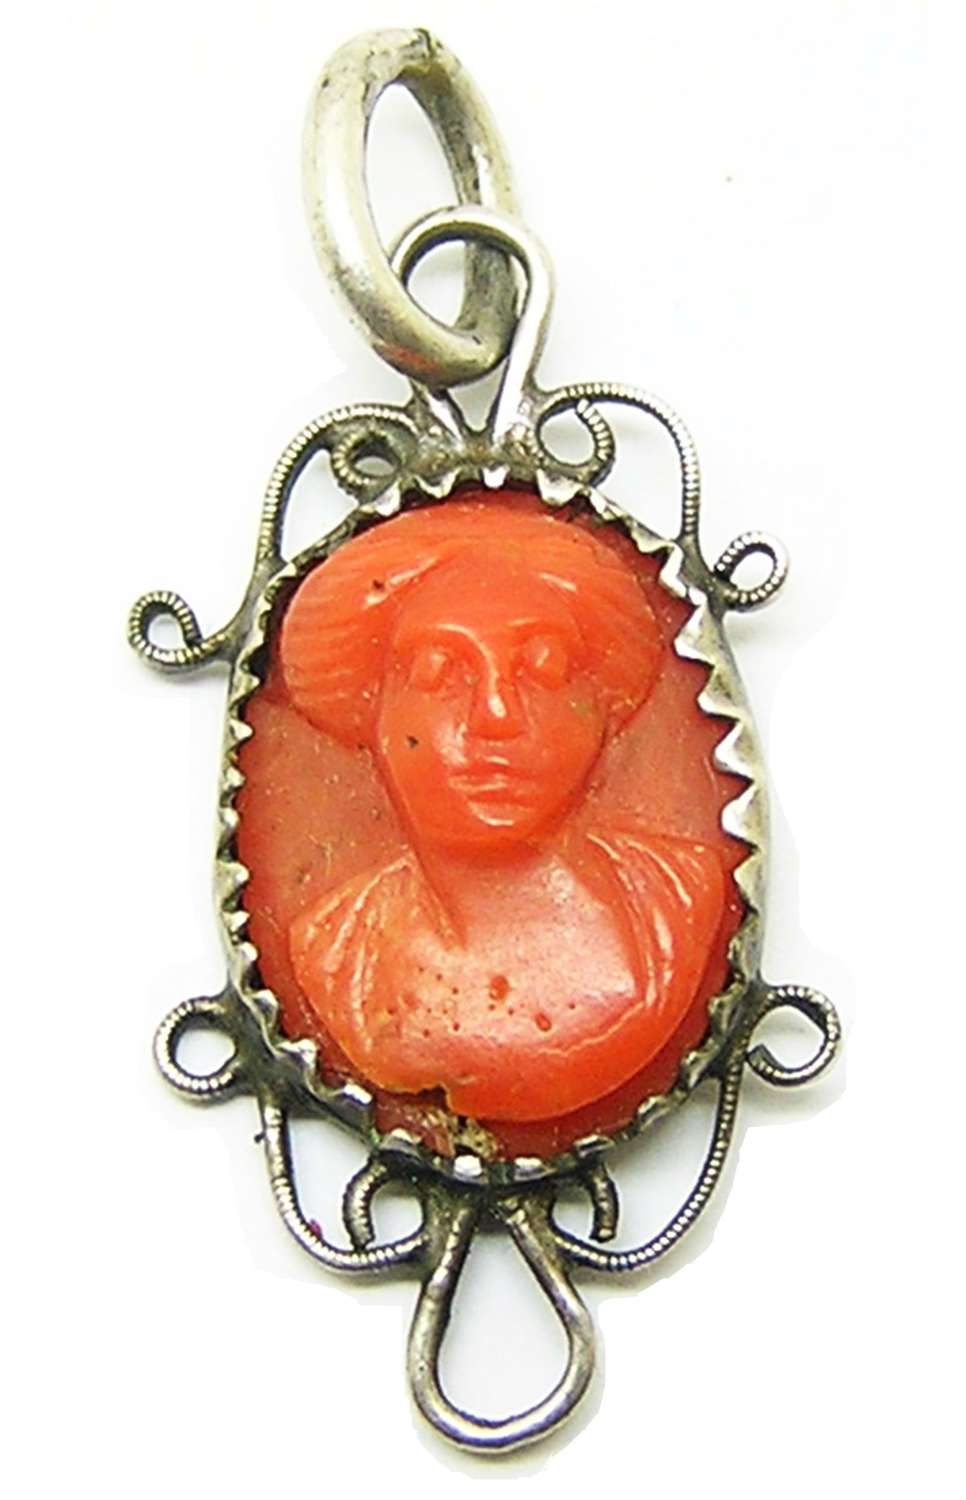 Renaissance silver and coral cameo pendant of a lady